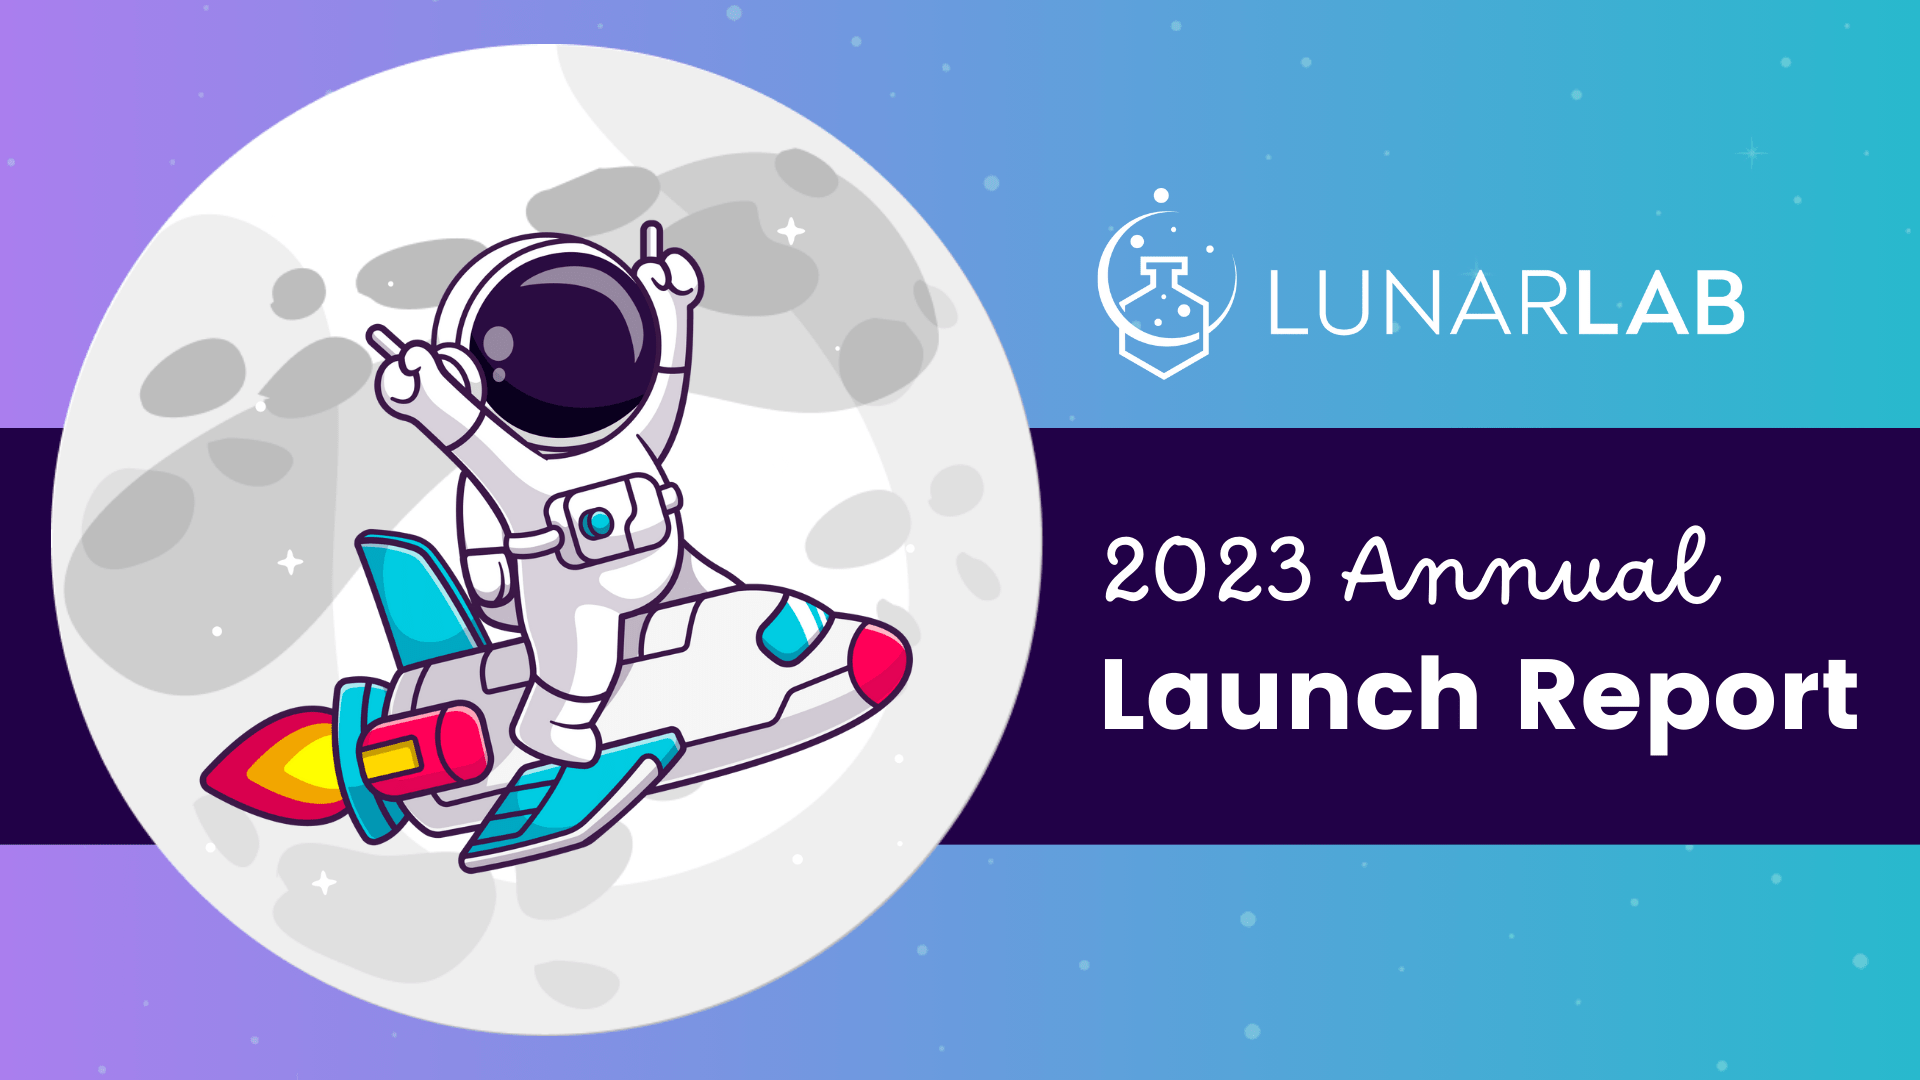 Moon with an astronaut flying over it on a purple background. Text reads "LunarLab 2023 Annual Launch Report"